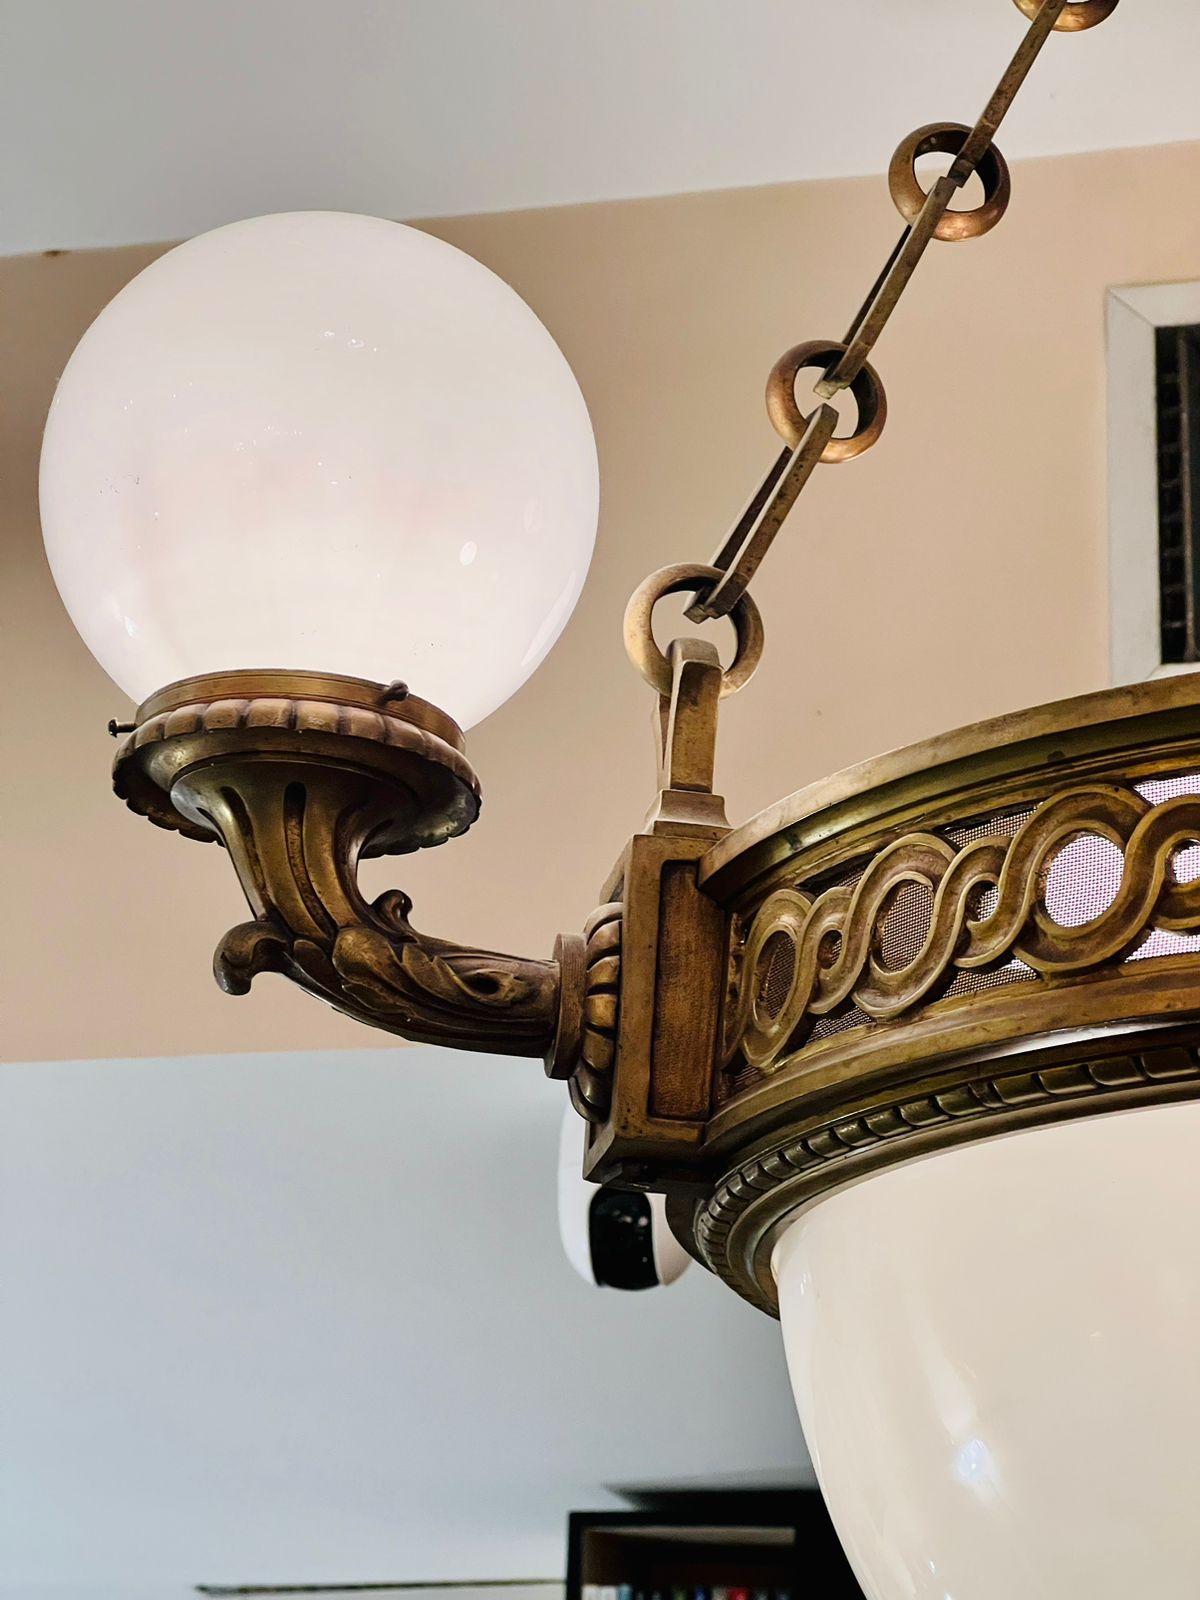 Incredible and rare chandelier in french bronze and opaline from the Monroe Palace in Rio de Janeiro circa 1904 demolished to make way for an avenue. We have two others that make up the set.